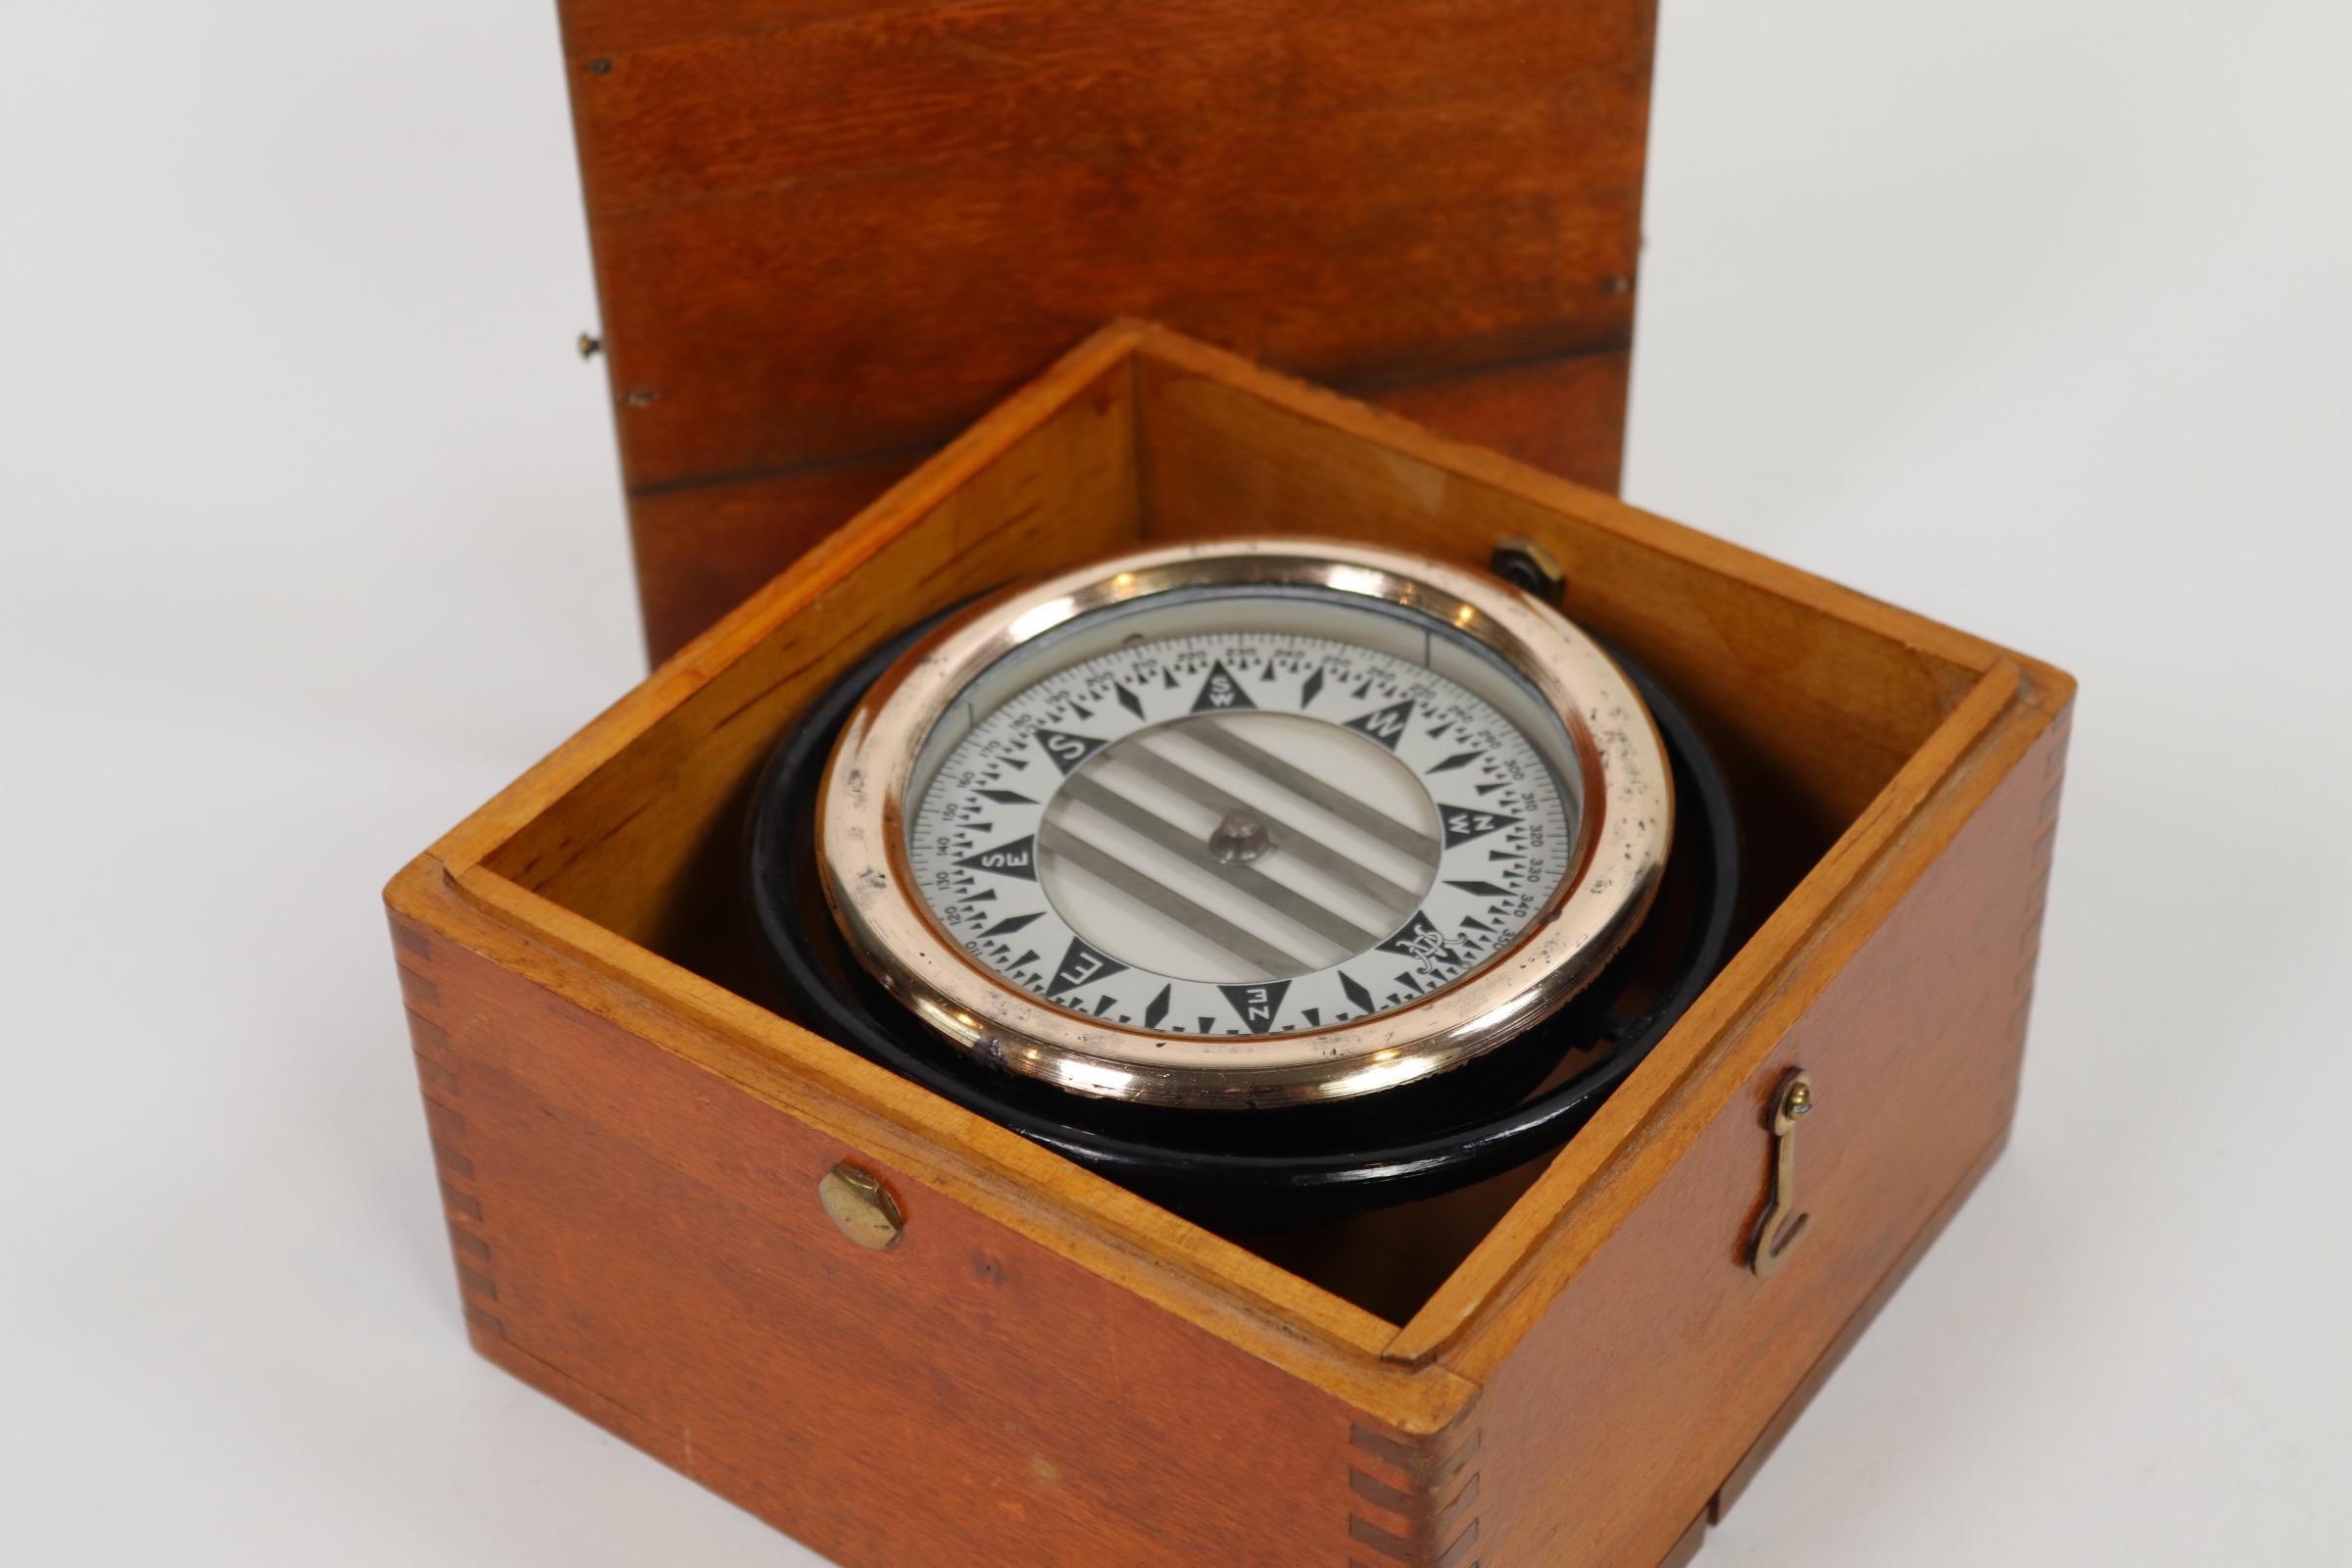 Brass boat compass by Wilcox Crittenden set into a dovetailed box with lid. Polished brass compass bezel. Dated February 24, 1953. Weight is 7 pounds.